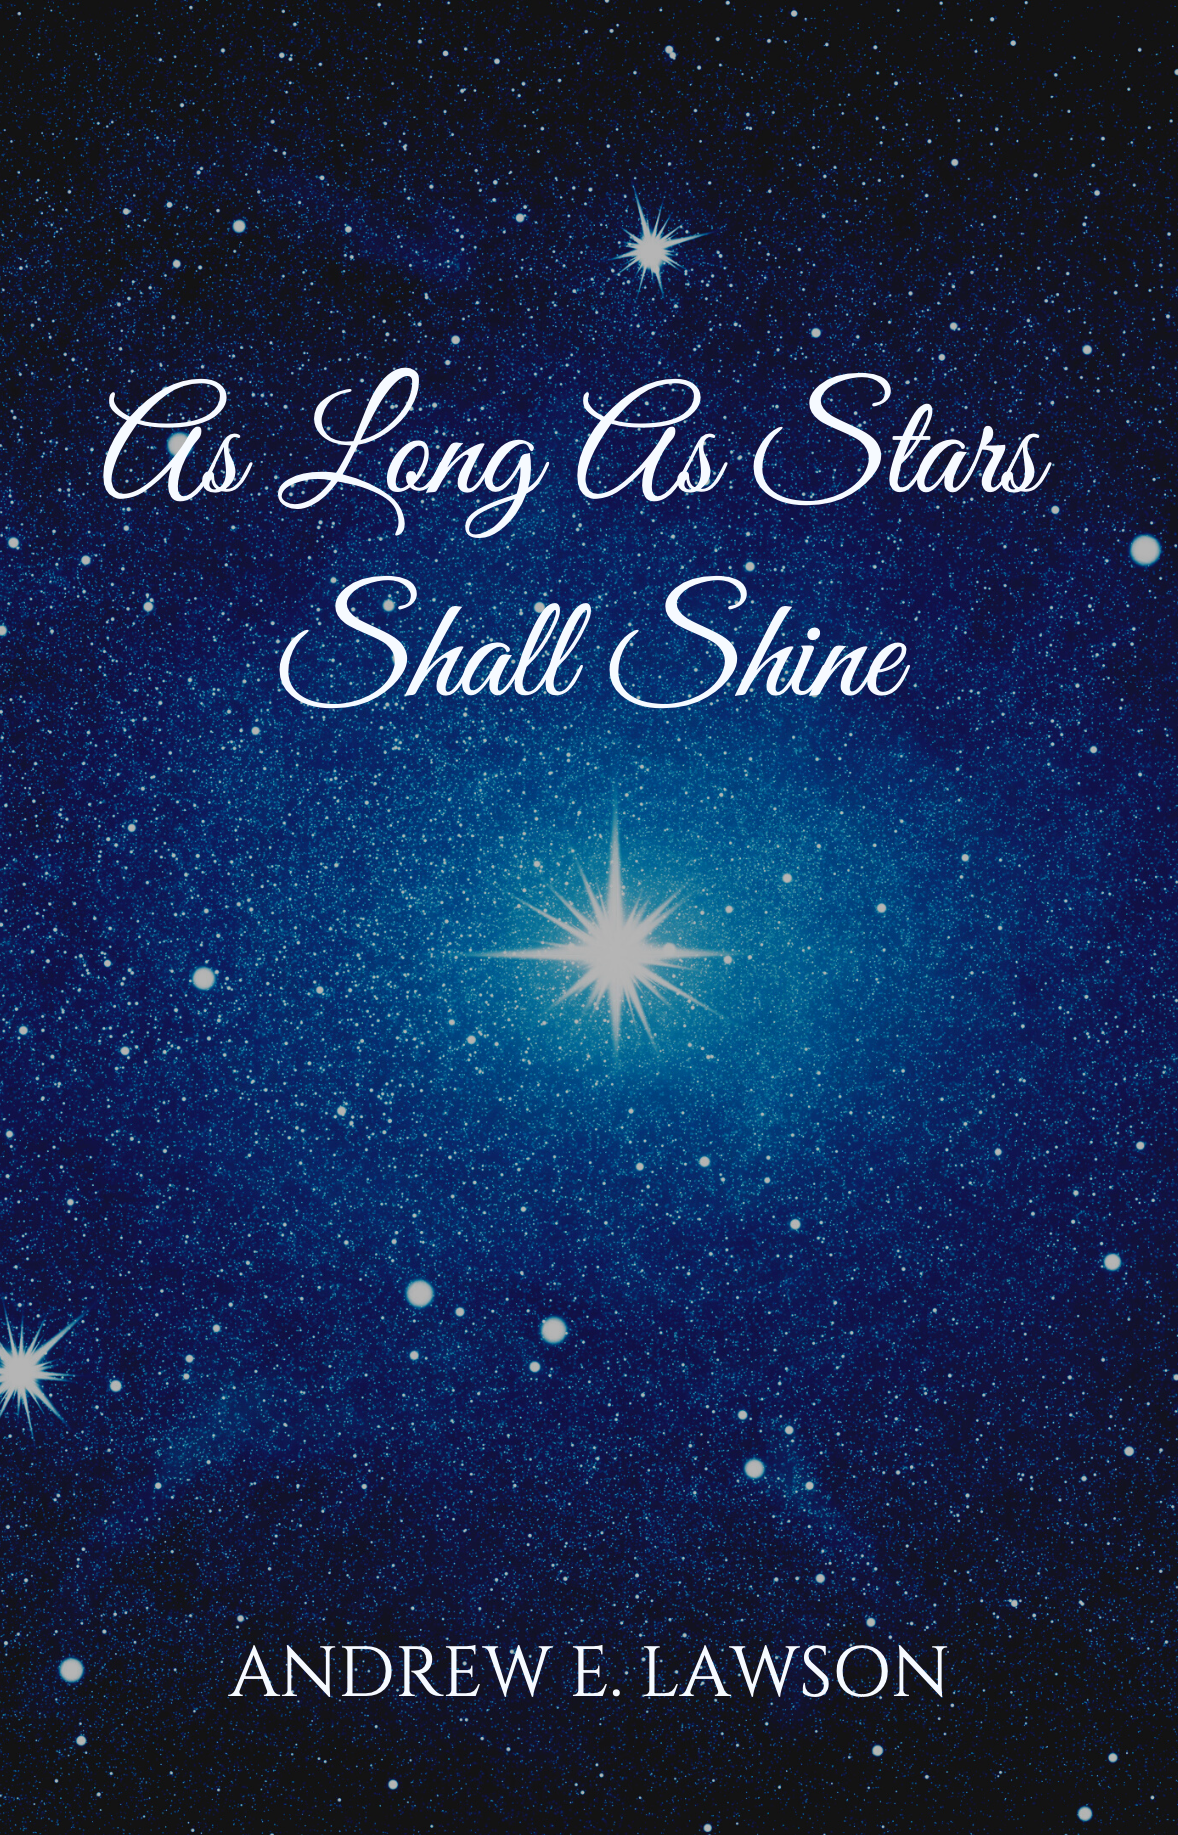 As Long As Stars Shall Shine (Score Only) by Andrew E. Lawson